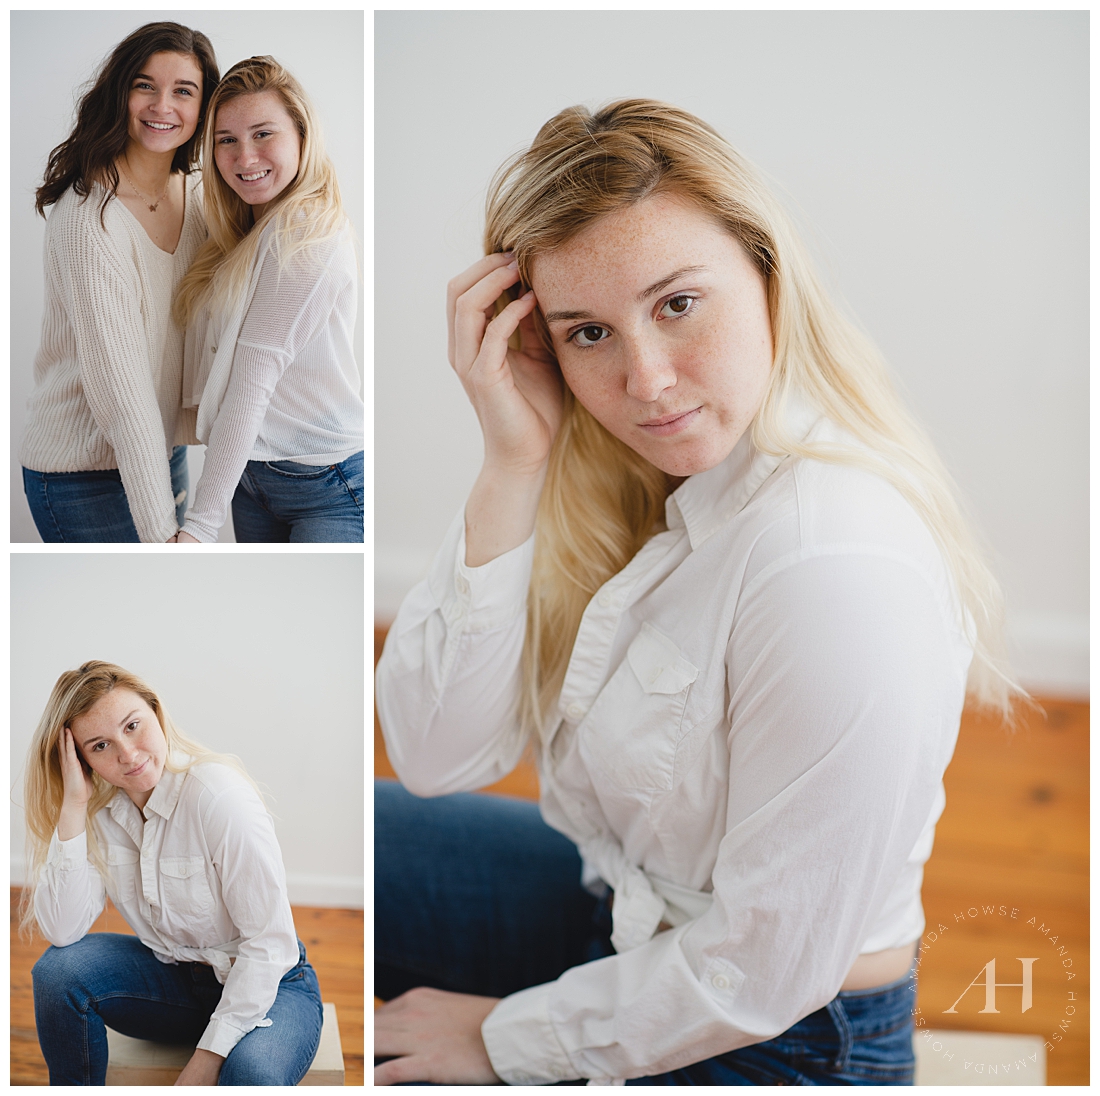 High School Senior Portraits without Makeup or Retouching | Project Beauty Session with Tacoma Senior Photographer Amanda Howse